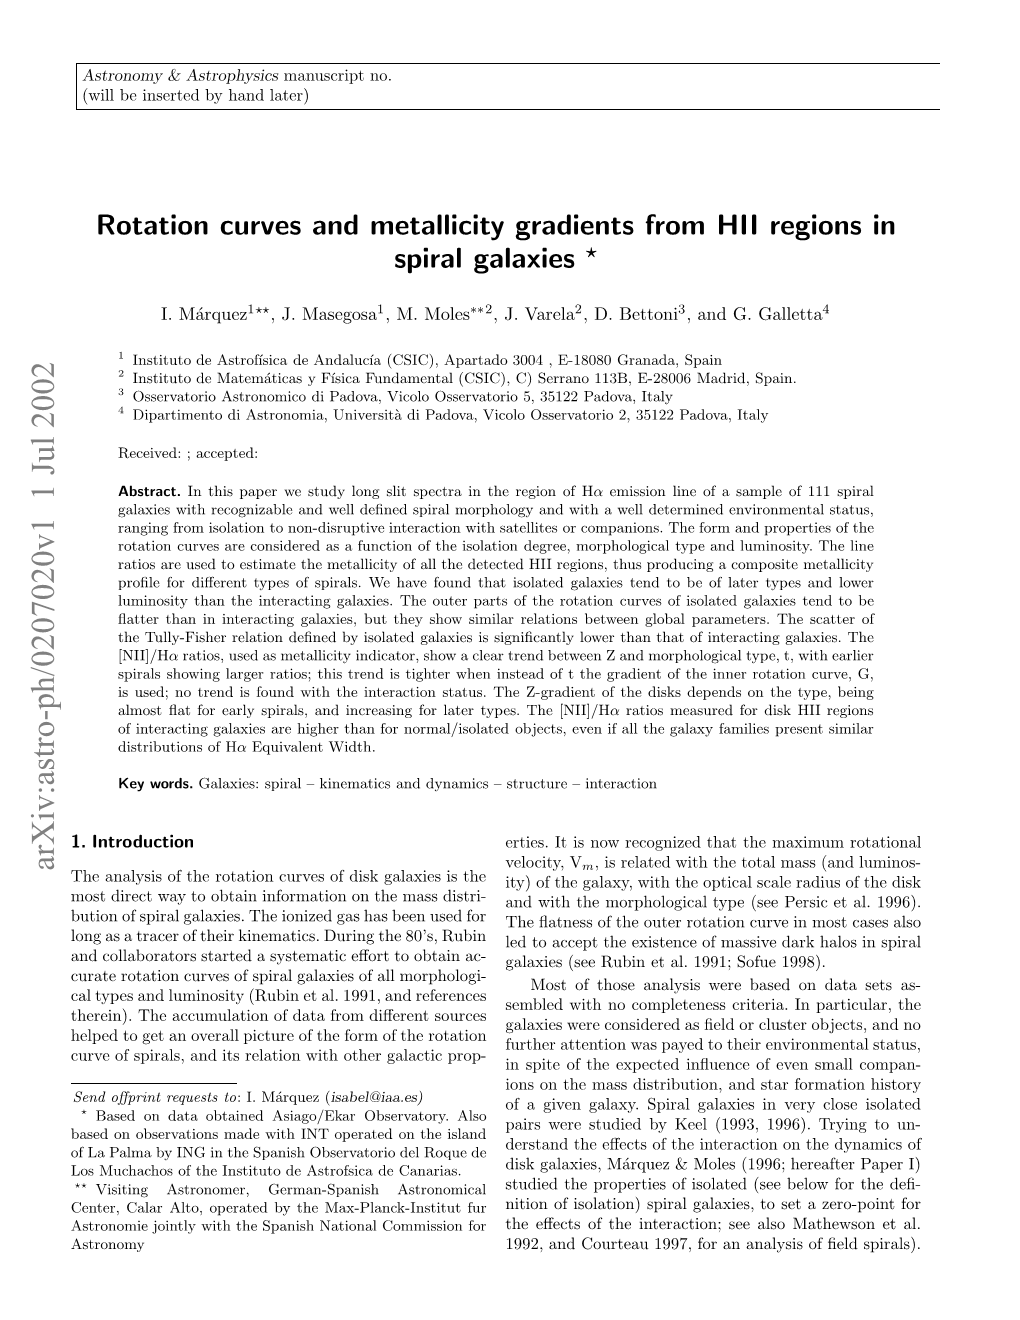 Rotation Curves and Metallicity Gradients from HII Regions in Spiral